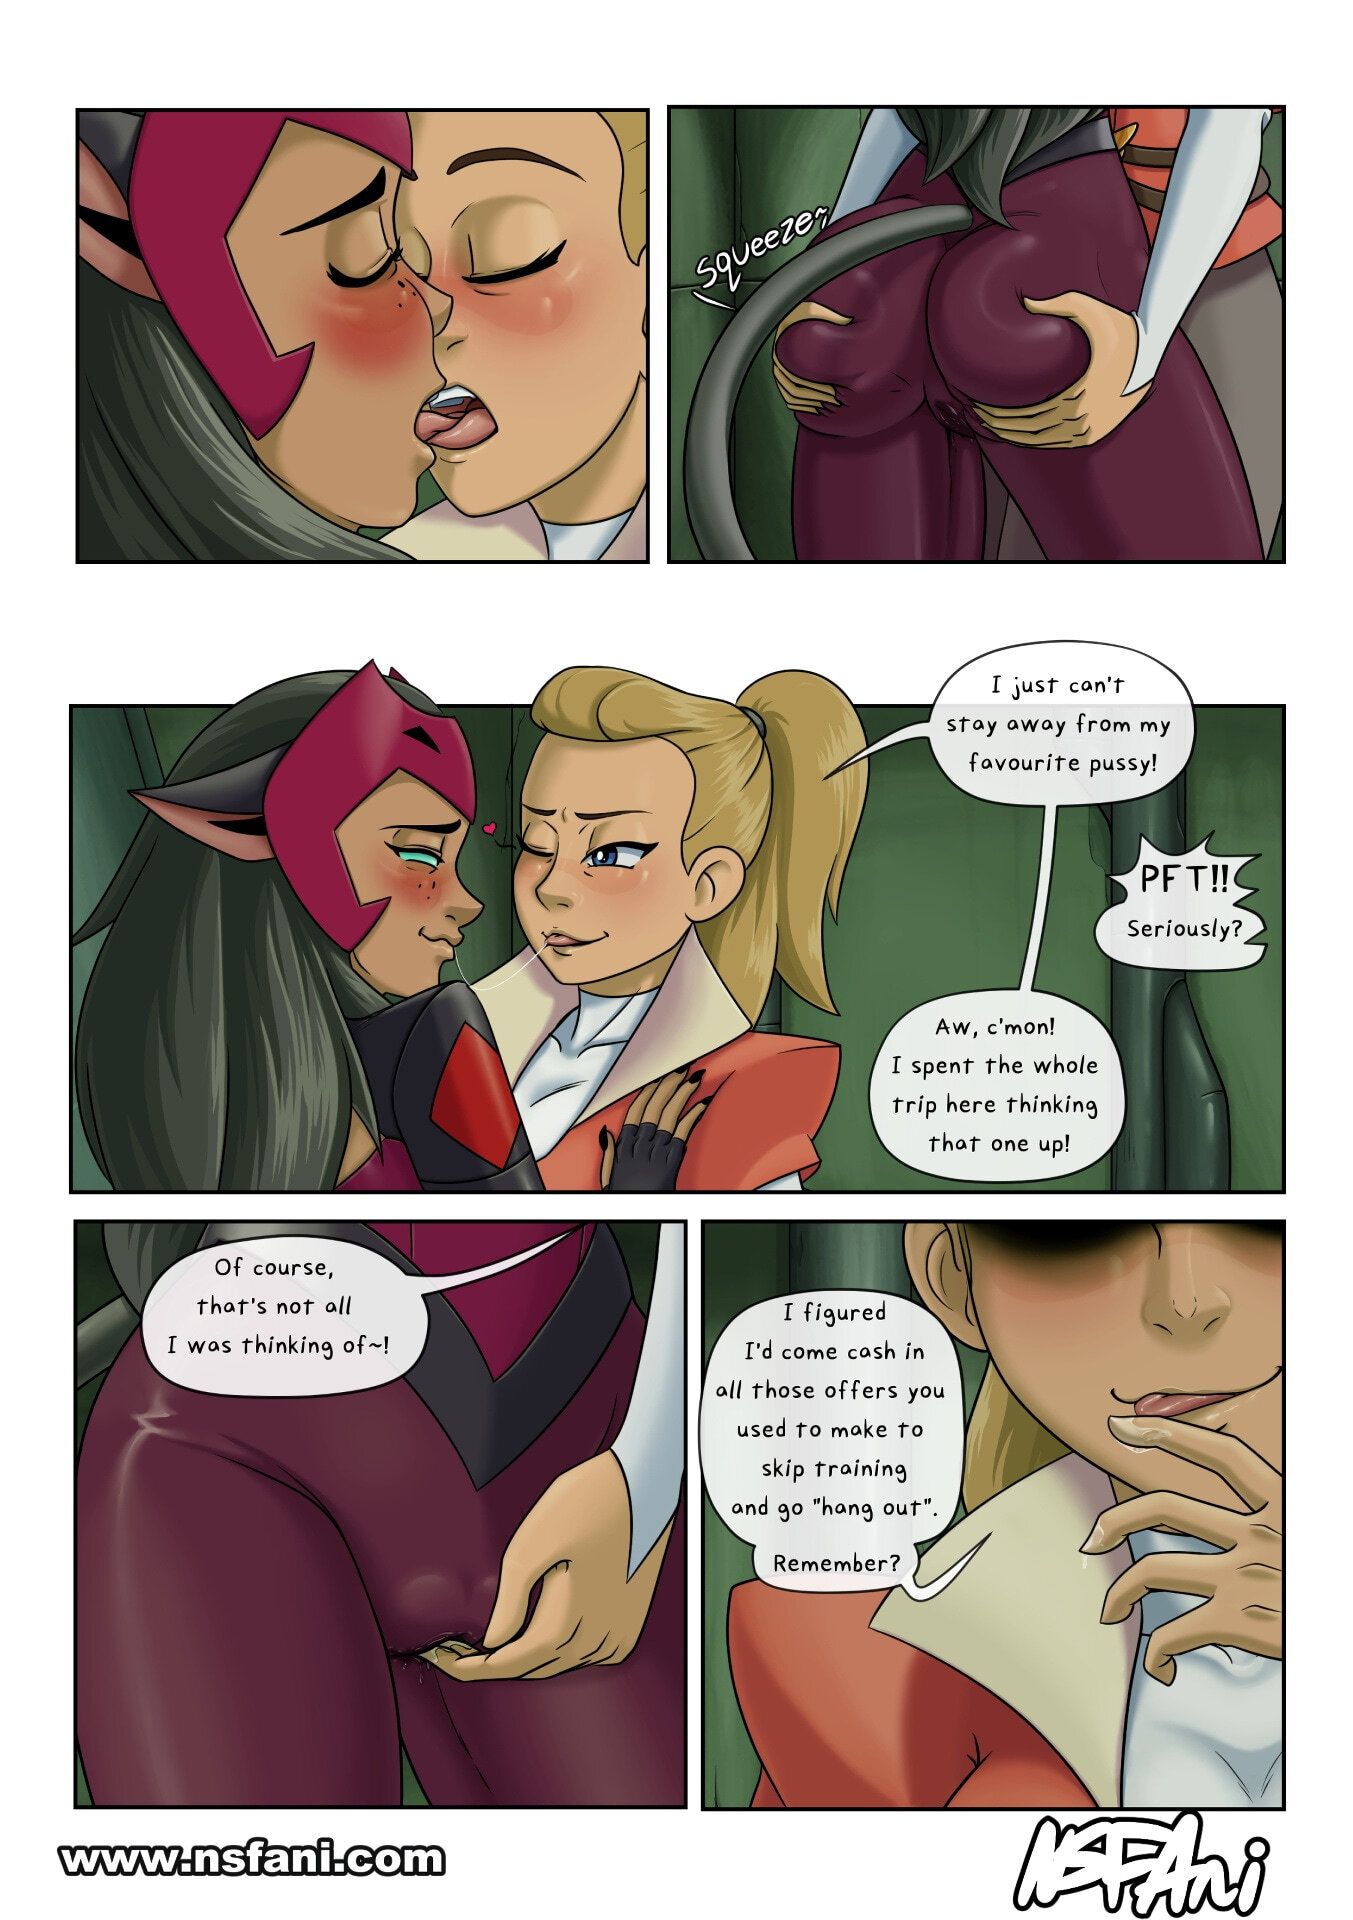 Scratching the Itch - Page 4